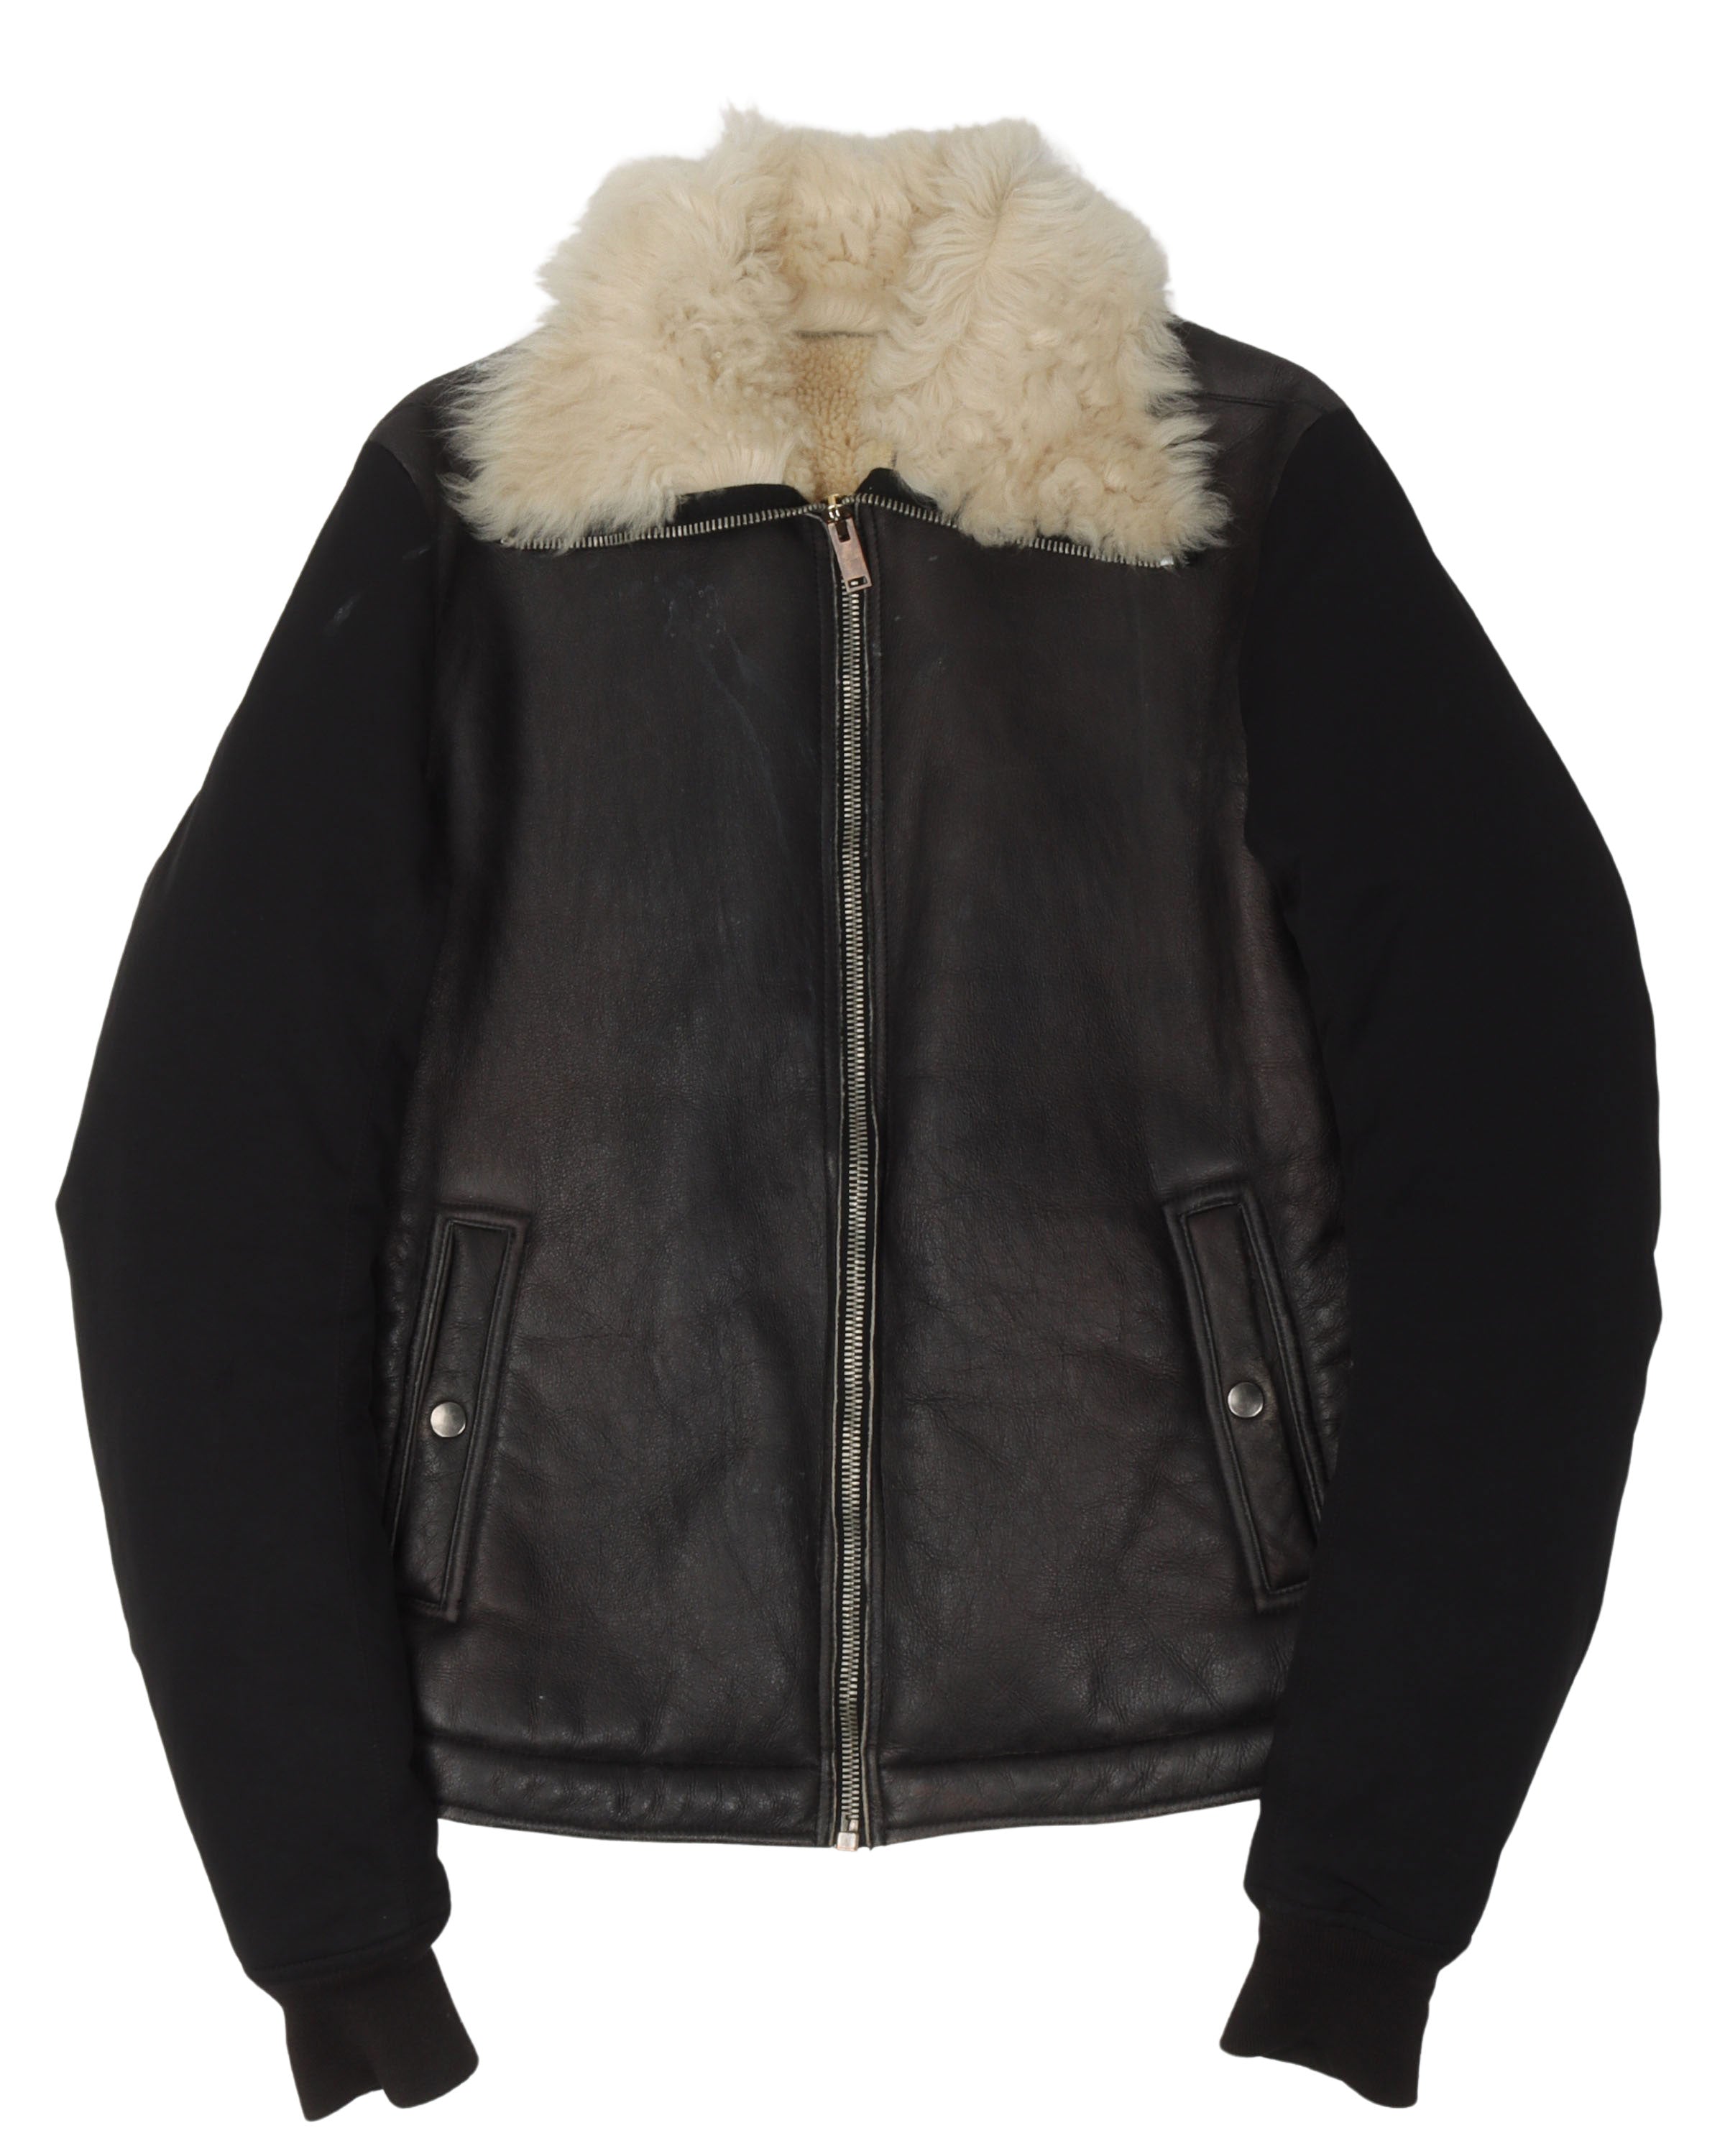 Shearling Leather Jacket w/ Cotton Sleeves